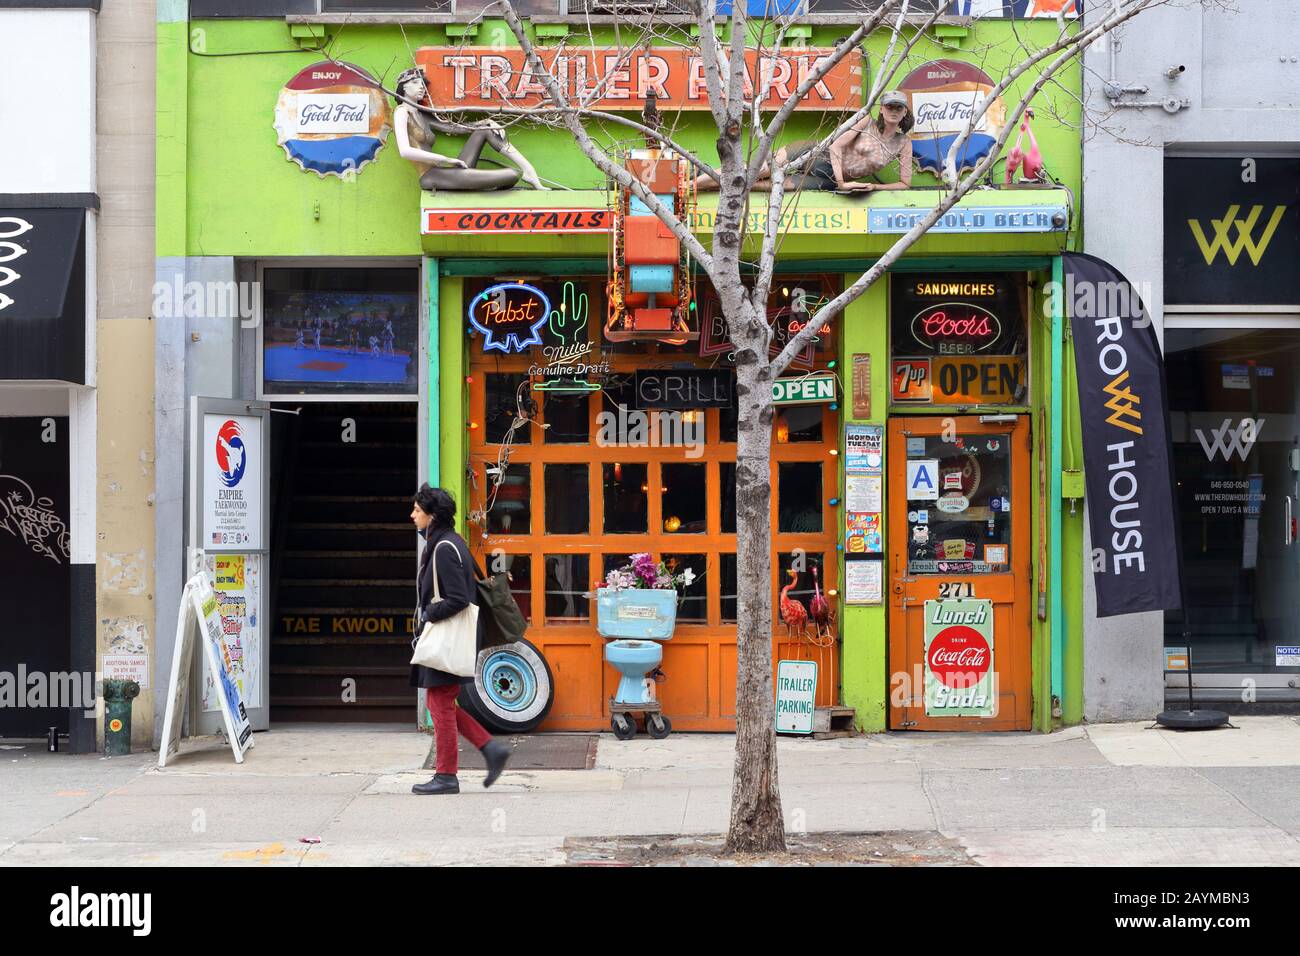 Trailer Park Lounge, 271 W 23rd St, New York. NYC storefront photo of a roadhouse themed bar and restaurant in Manhattan's Chelsea neighborhood Stock Photo